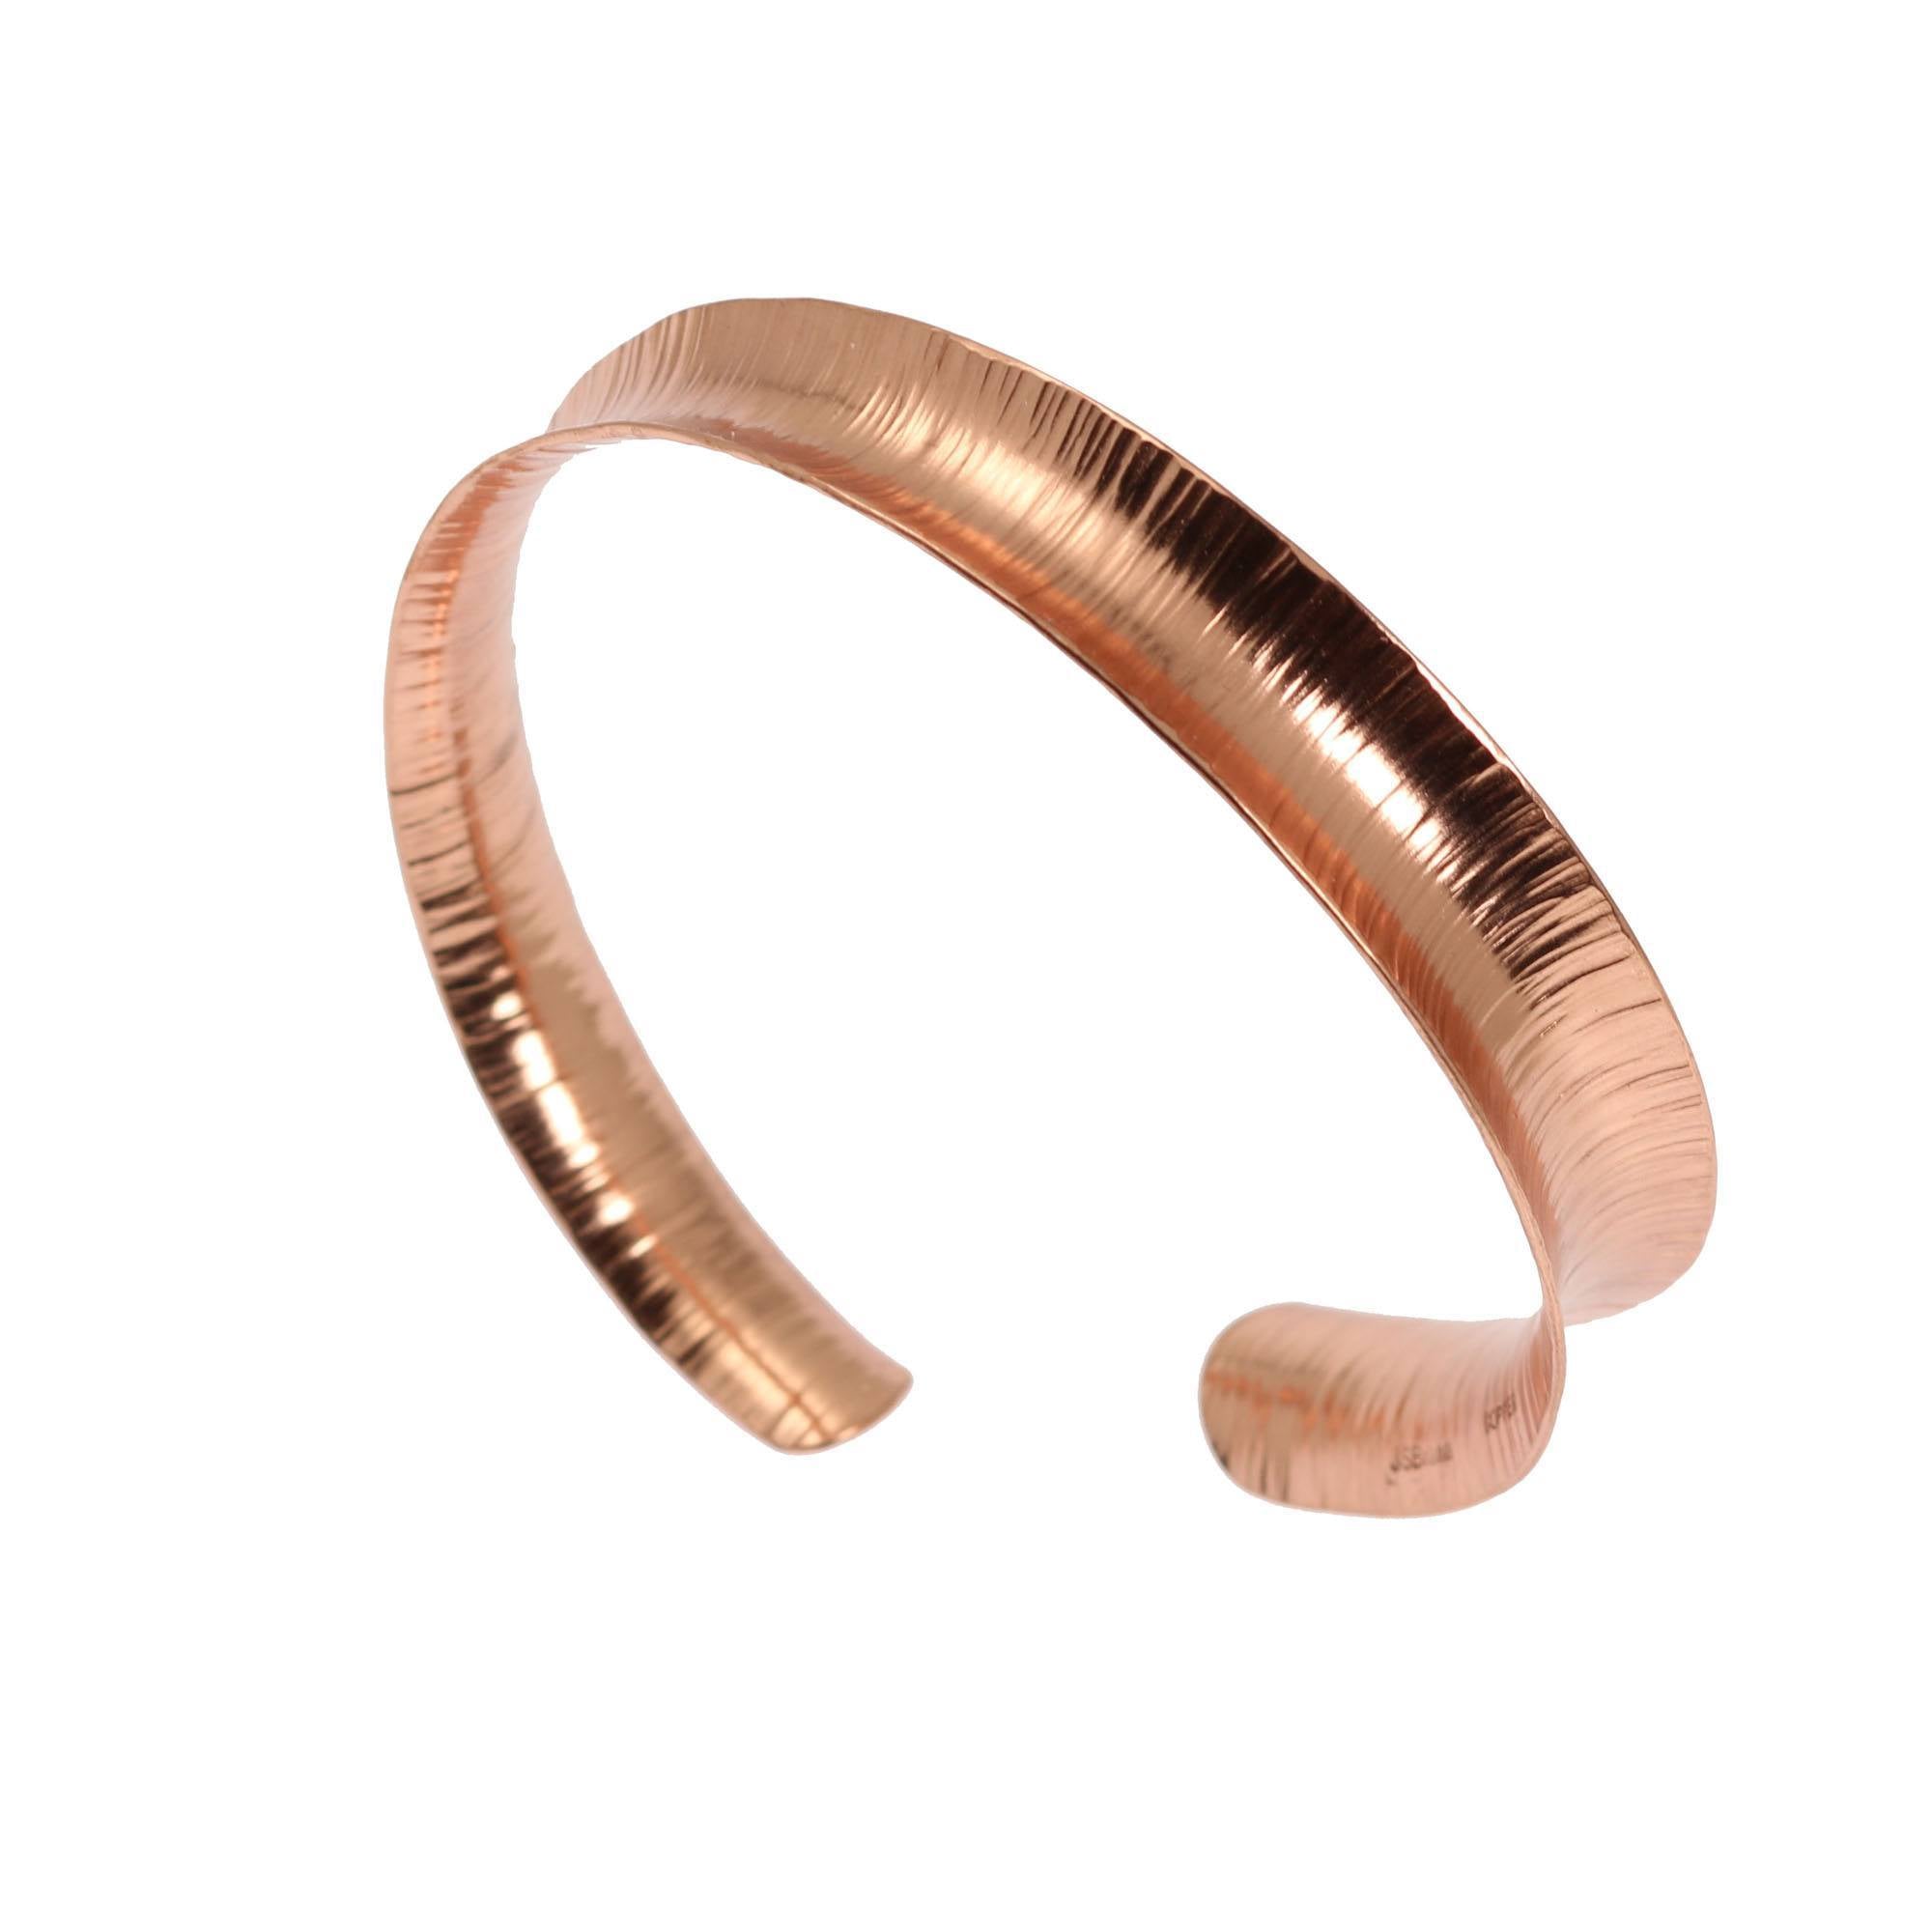 Detail View of Chased Anticlastic Copper Bangle Bracelet